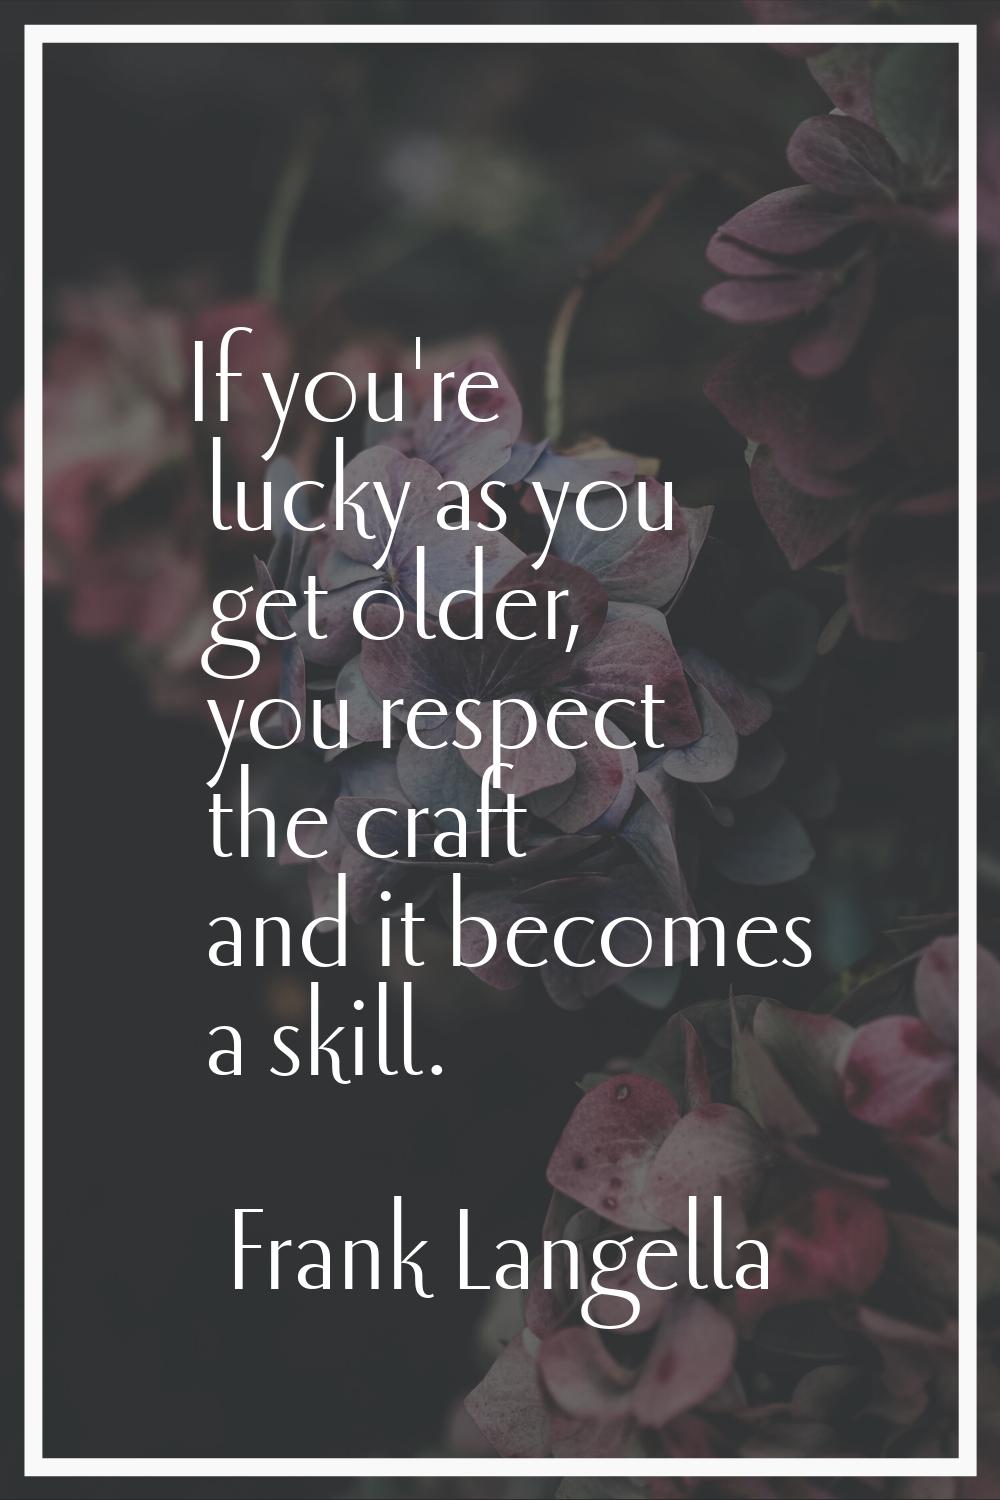 If you're lucky as you get older, you respect the craft and it becomes a skill.